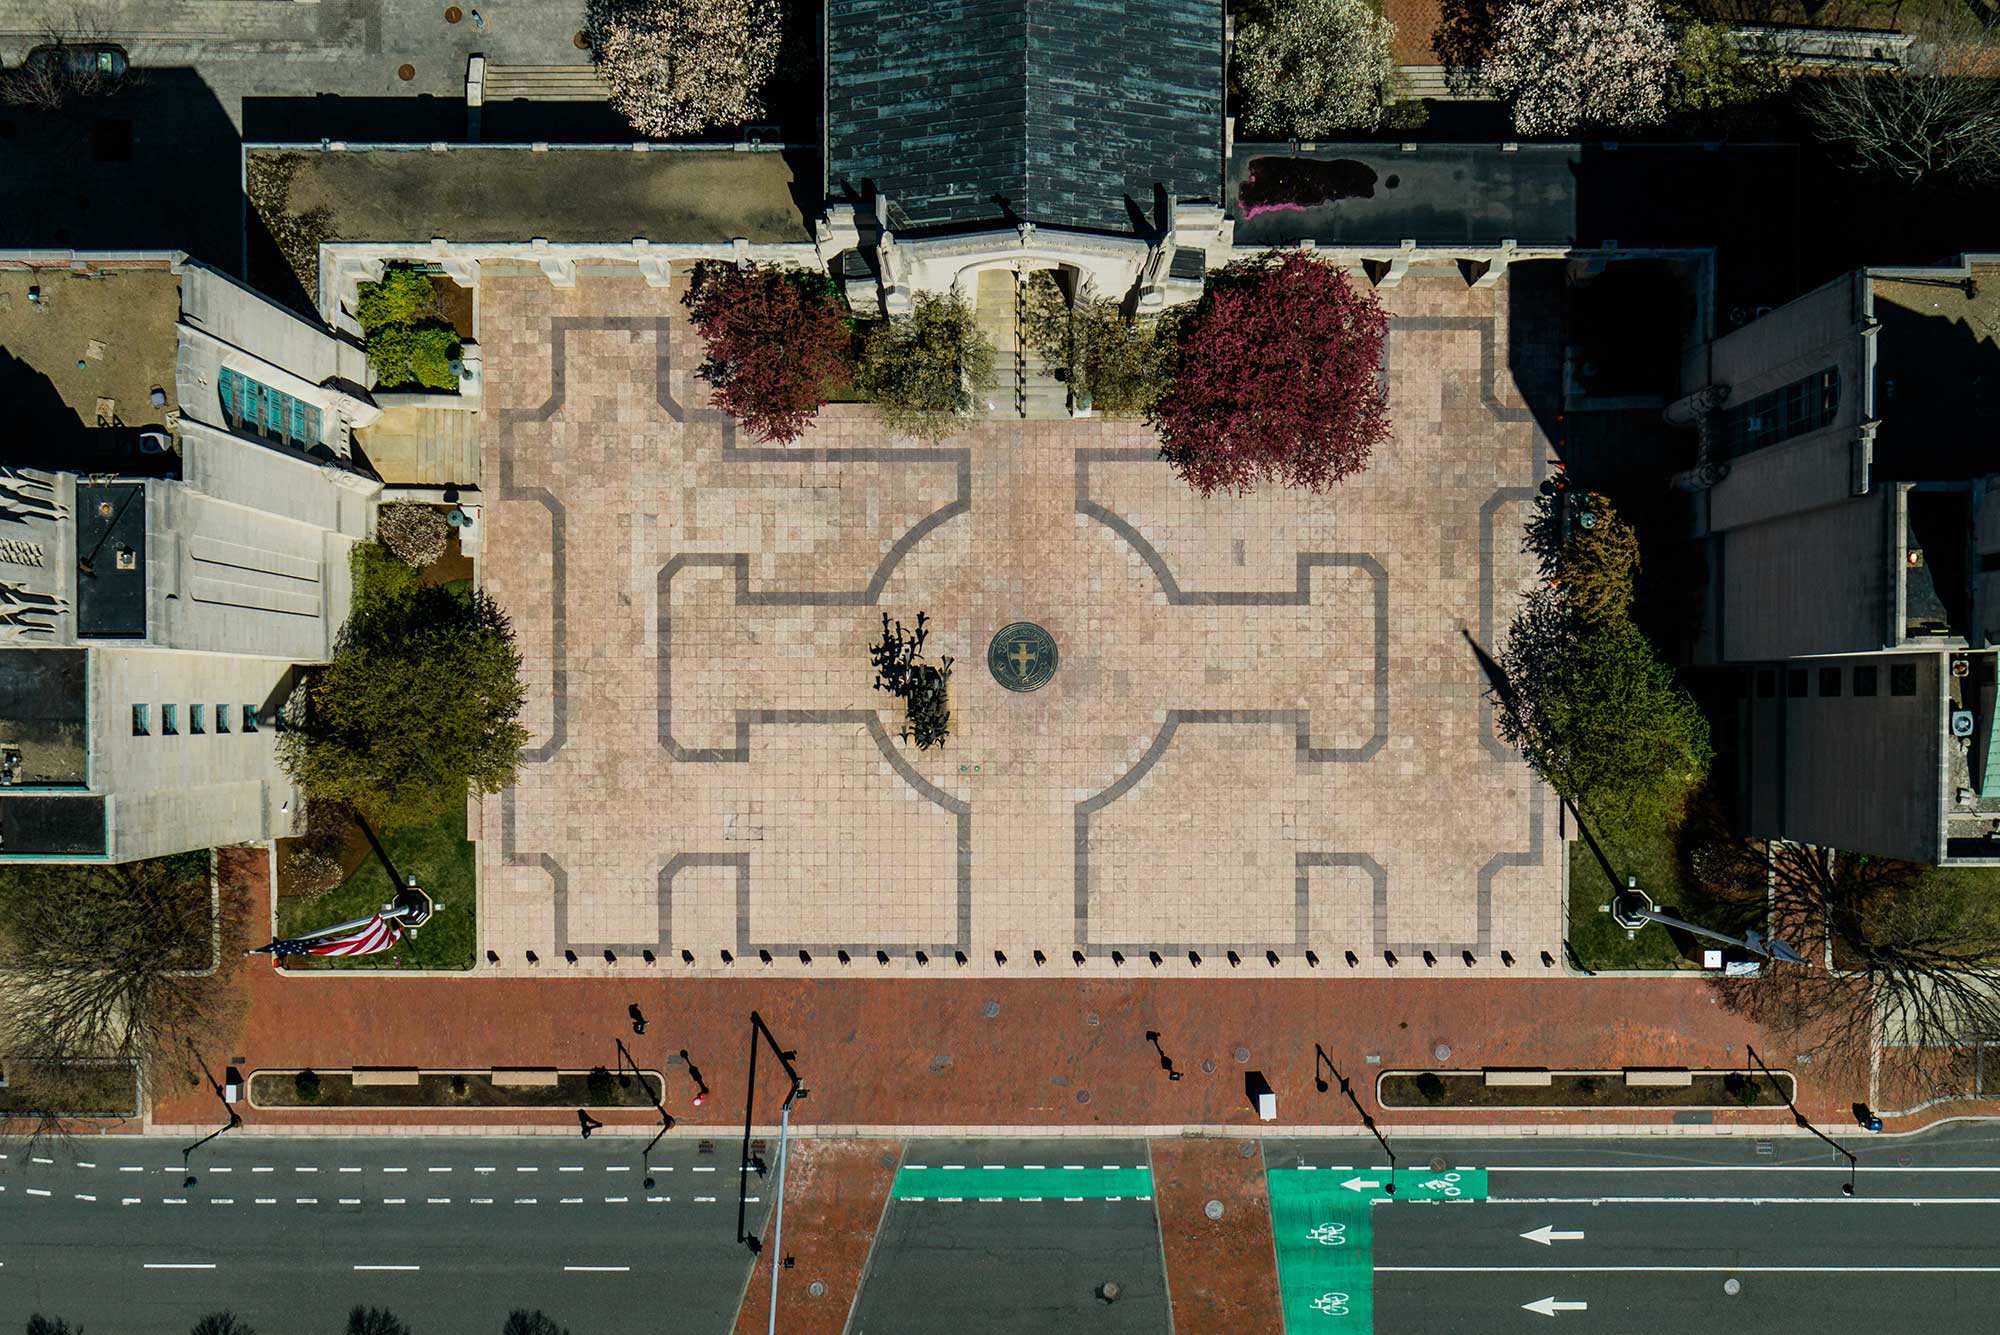 Aerial shot of Marsh Plaza and Comm Ave. Drone footage vividly capturing how BU has been transformed by the COVID-19 pandemic. Video shot by Above Summit, edited by Chris Palmer, BU Productions